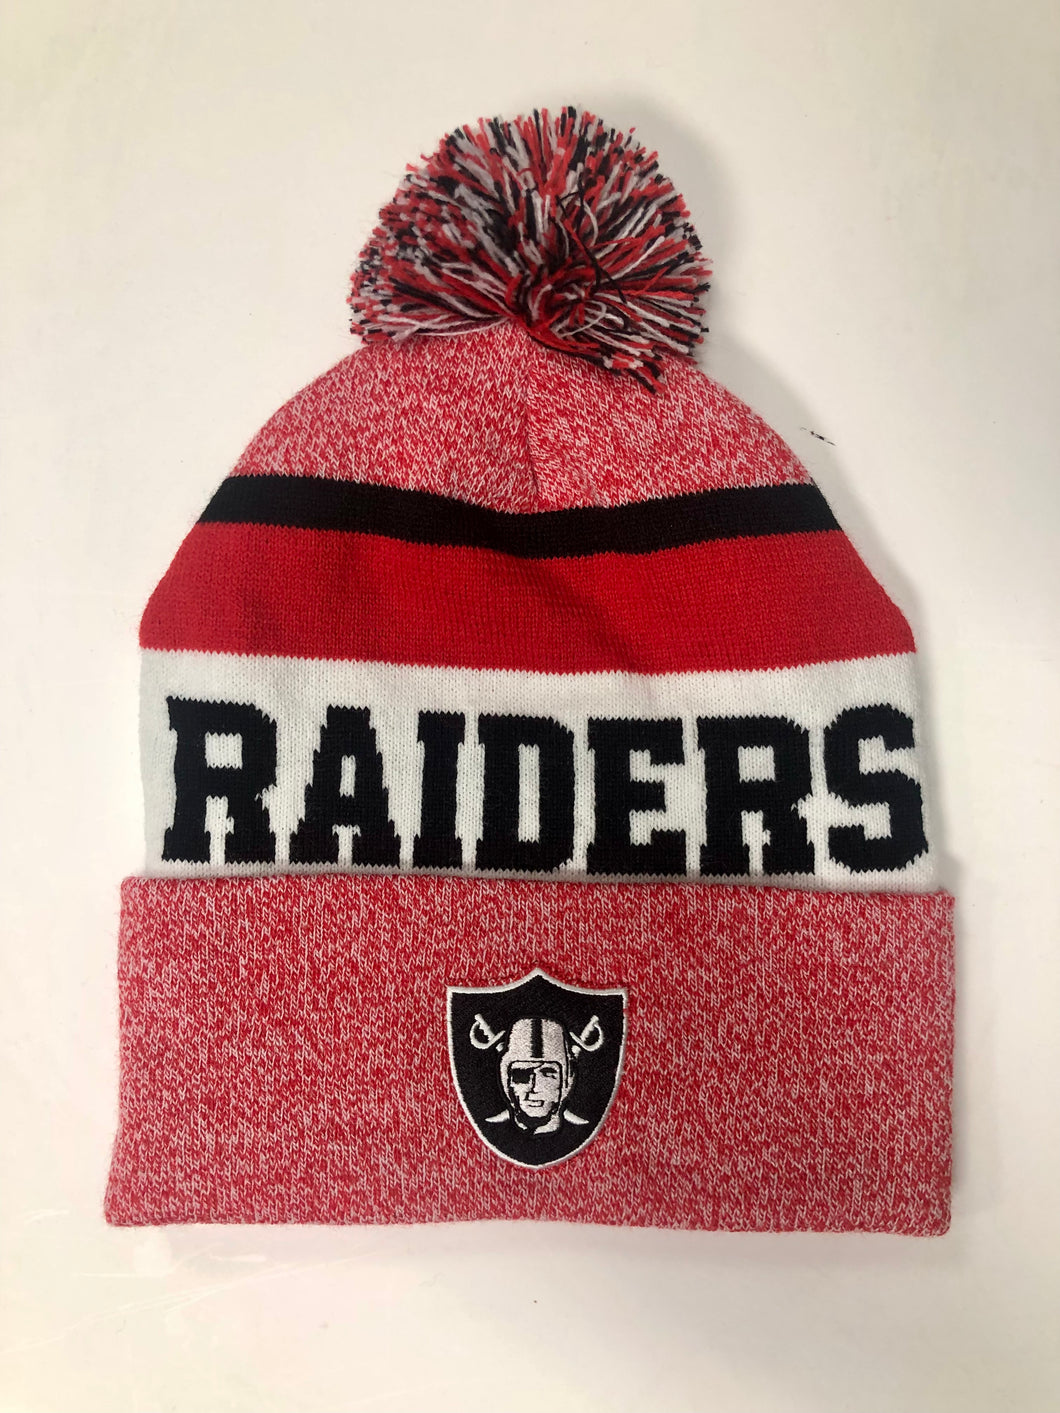 Sublimated Winter Hat with Cuff and Pom-Pom